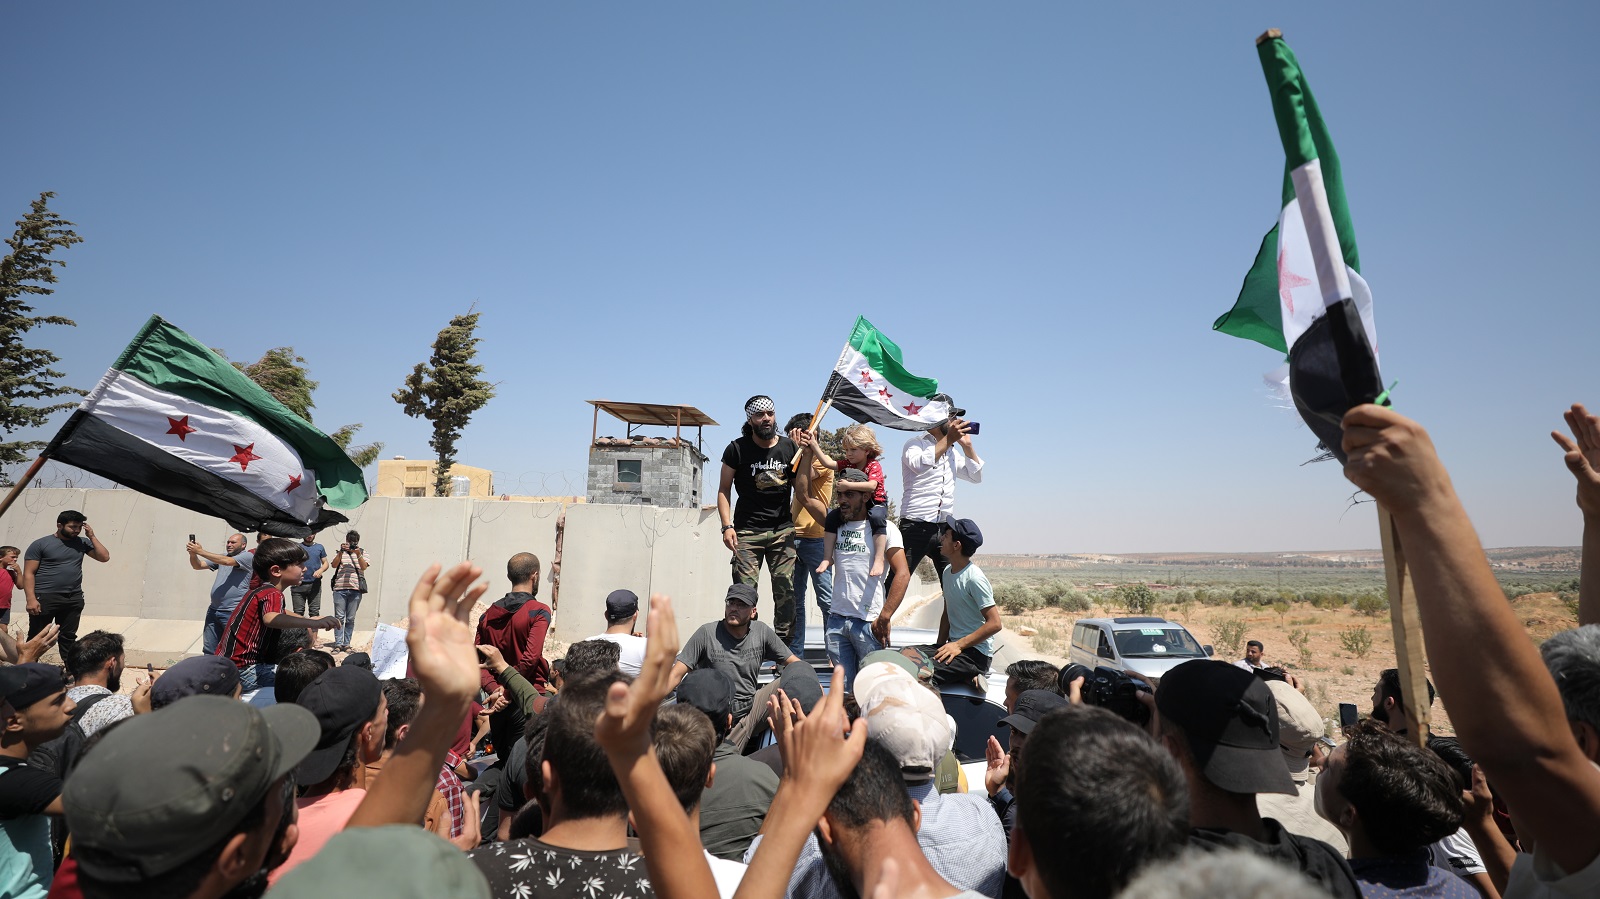 epa10117197 Syrian people protest near a Turkish military post against Turkish calls for reconciliation between rebels and the Syrian government, in Al-Mastumah village, seven kilometers south of Idlib, Syria, 12 August 2022. Protests erupted in cities in northern Syria that are held by Syrian opposition groups a day after Turkish Foreign Minister Mevlut Cavusoglu's statements on possible reconciliation between the Syrian opposition and government.  EPA/YAHYA NEMAH